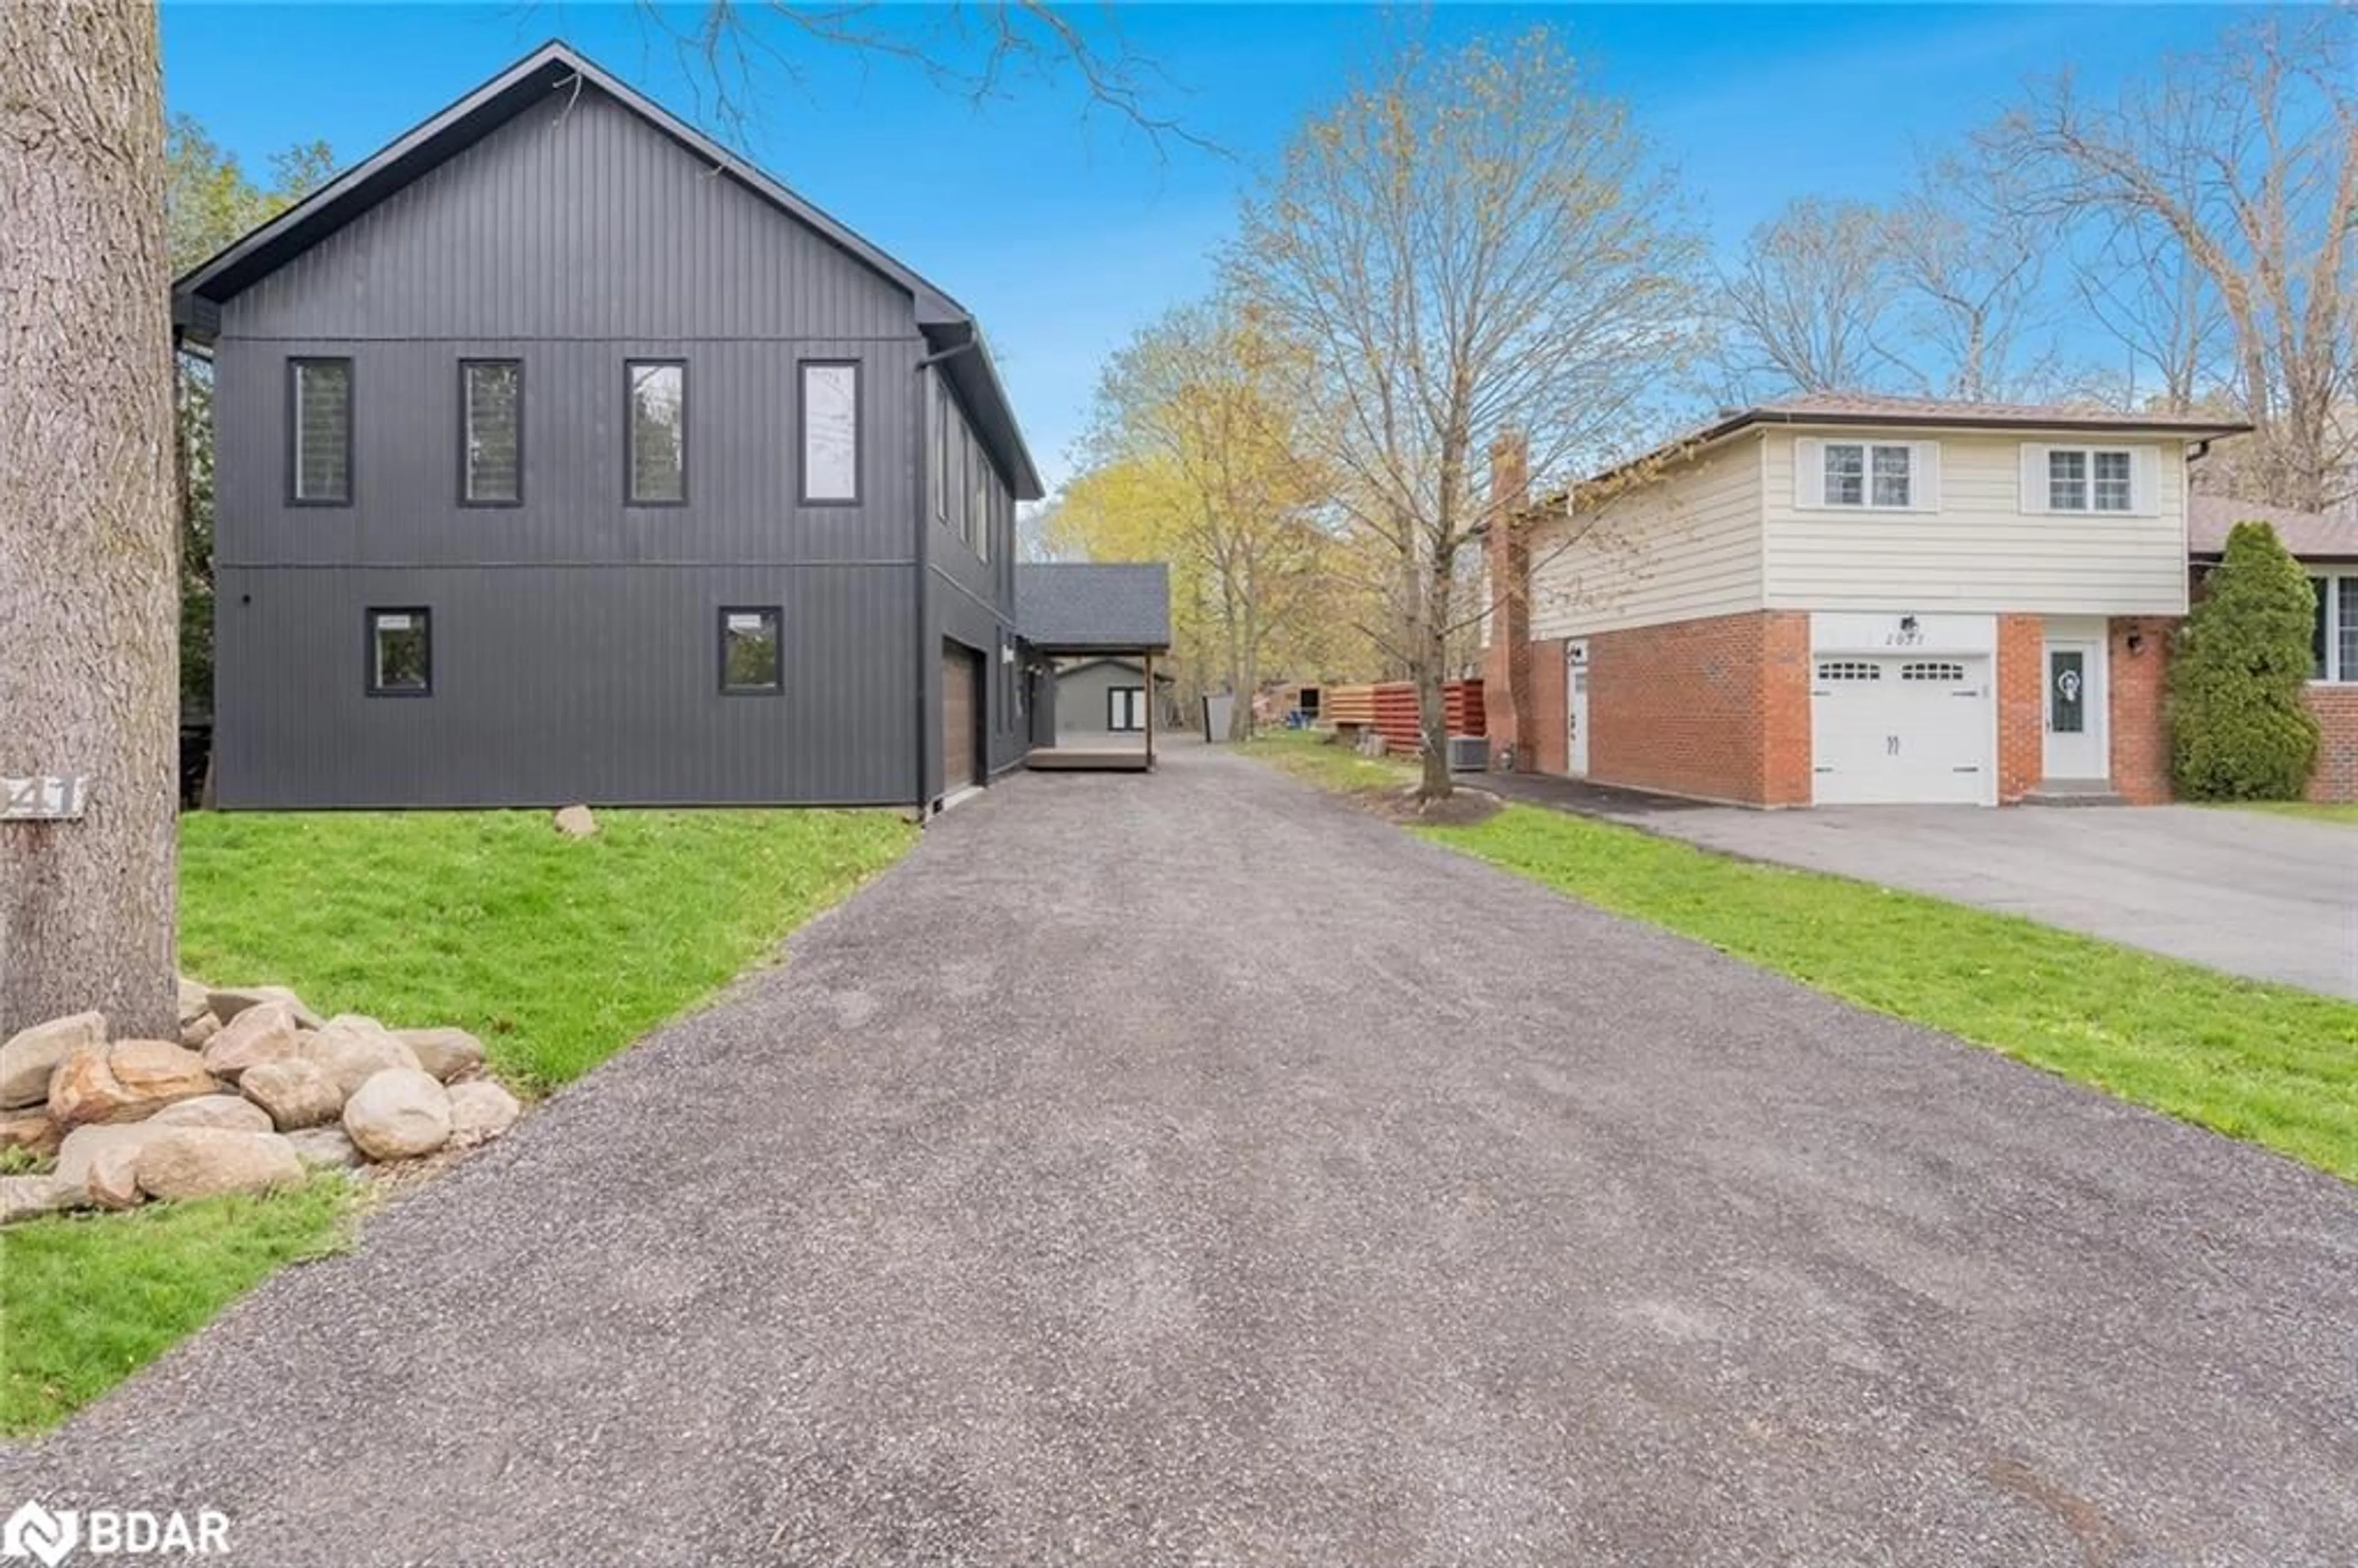 Frontside or backside of a home for 2041 Lilac Dr, Innisfil Ontario L9S 1Y9